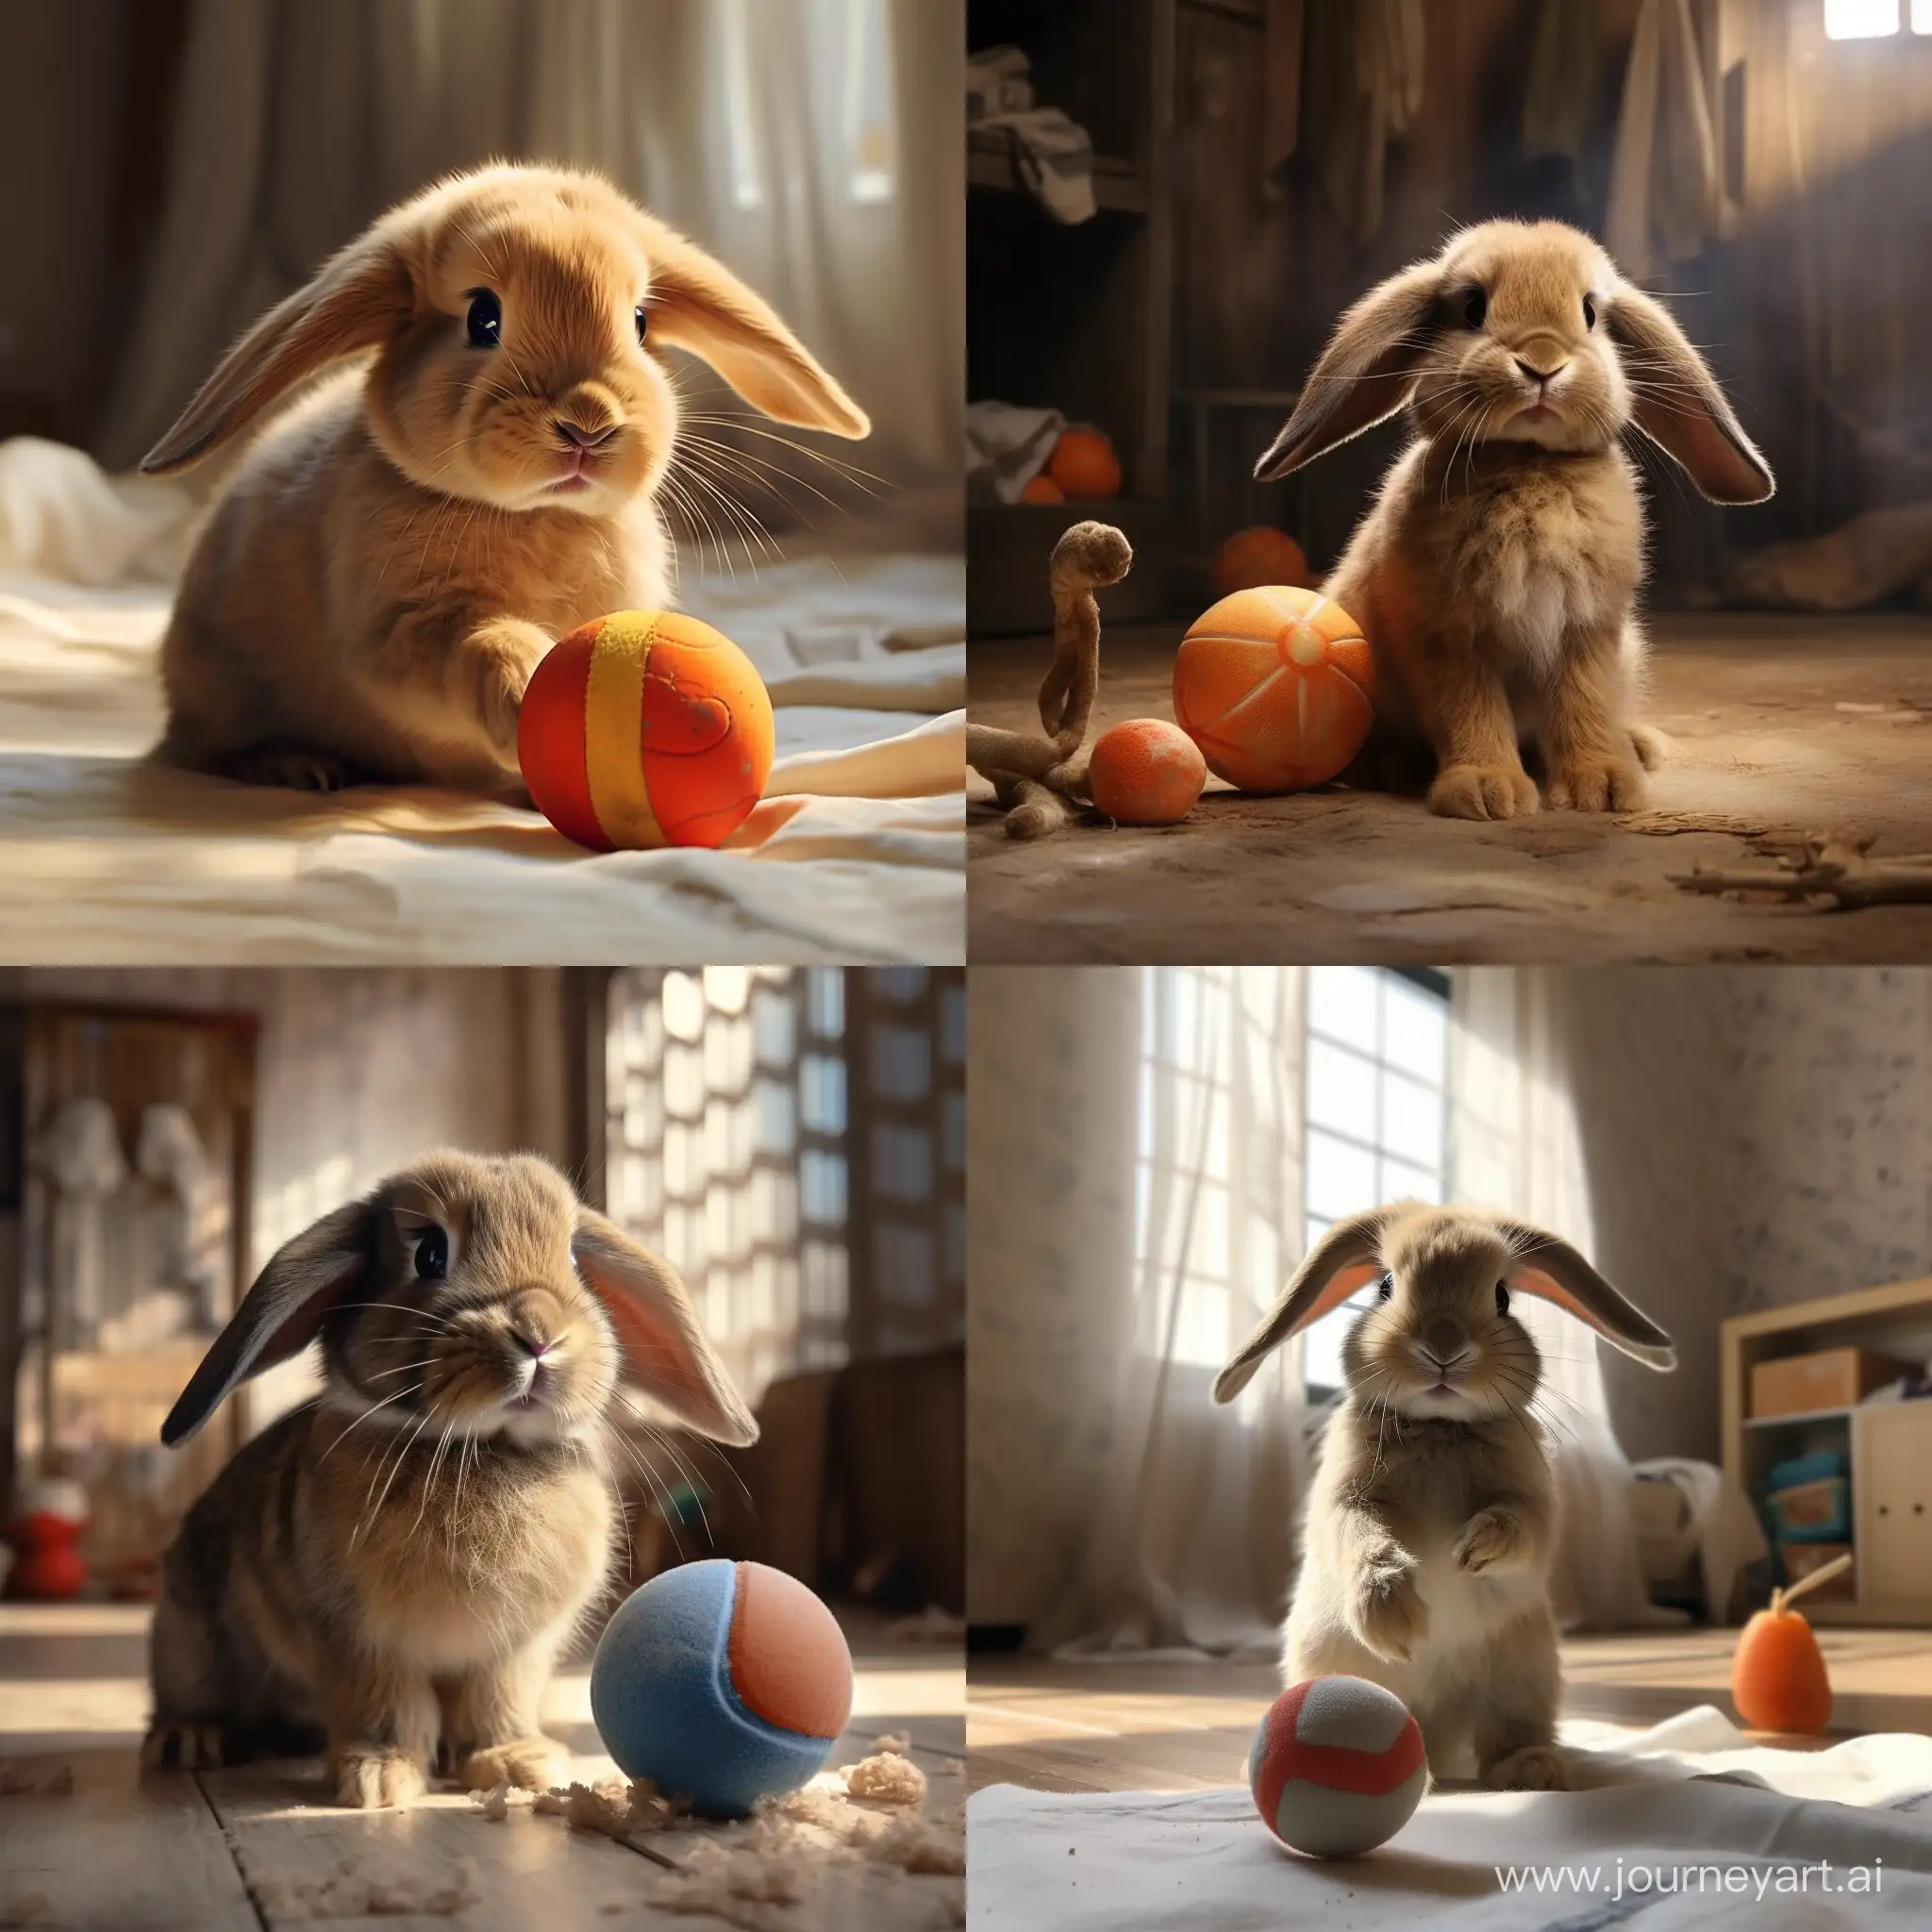 A realistic picture, resembling a photograph, of an indoor pet rabbit with floppy ears, playing with a toy ball.